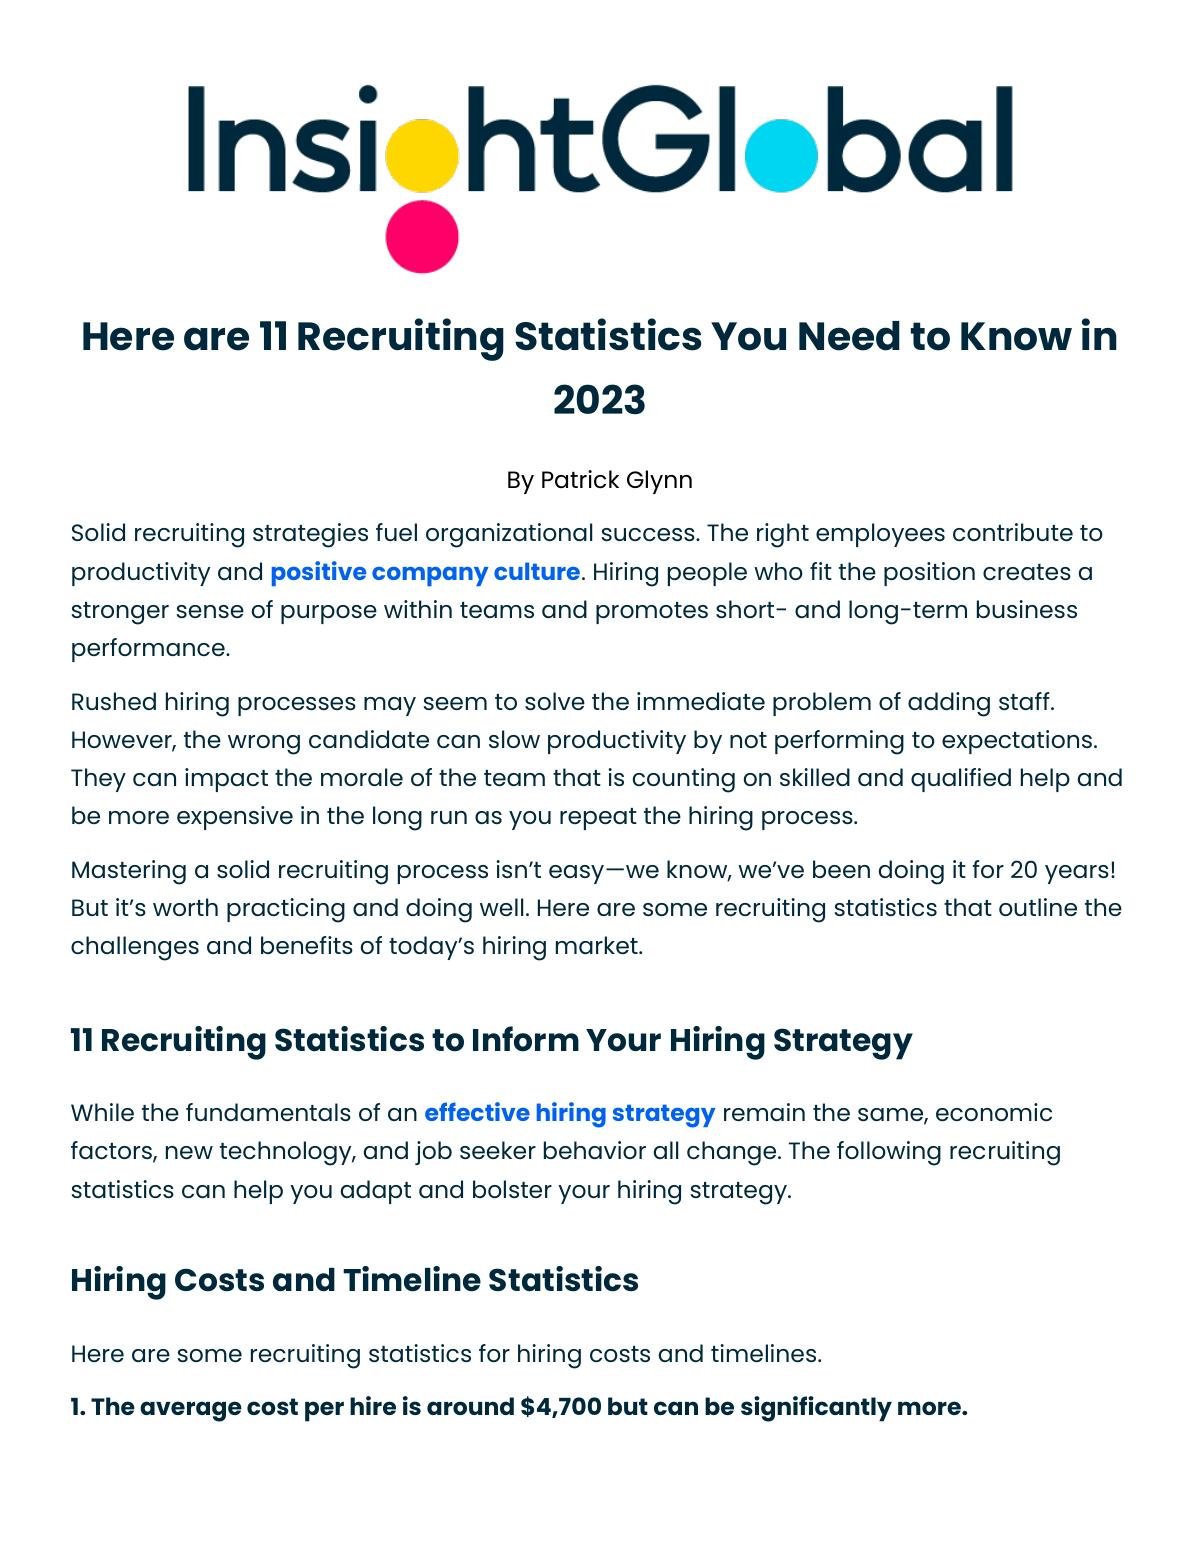 Here are 11 Recruiting Statistics You Need to Know in 2023